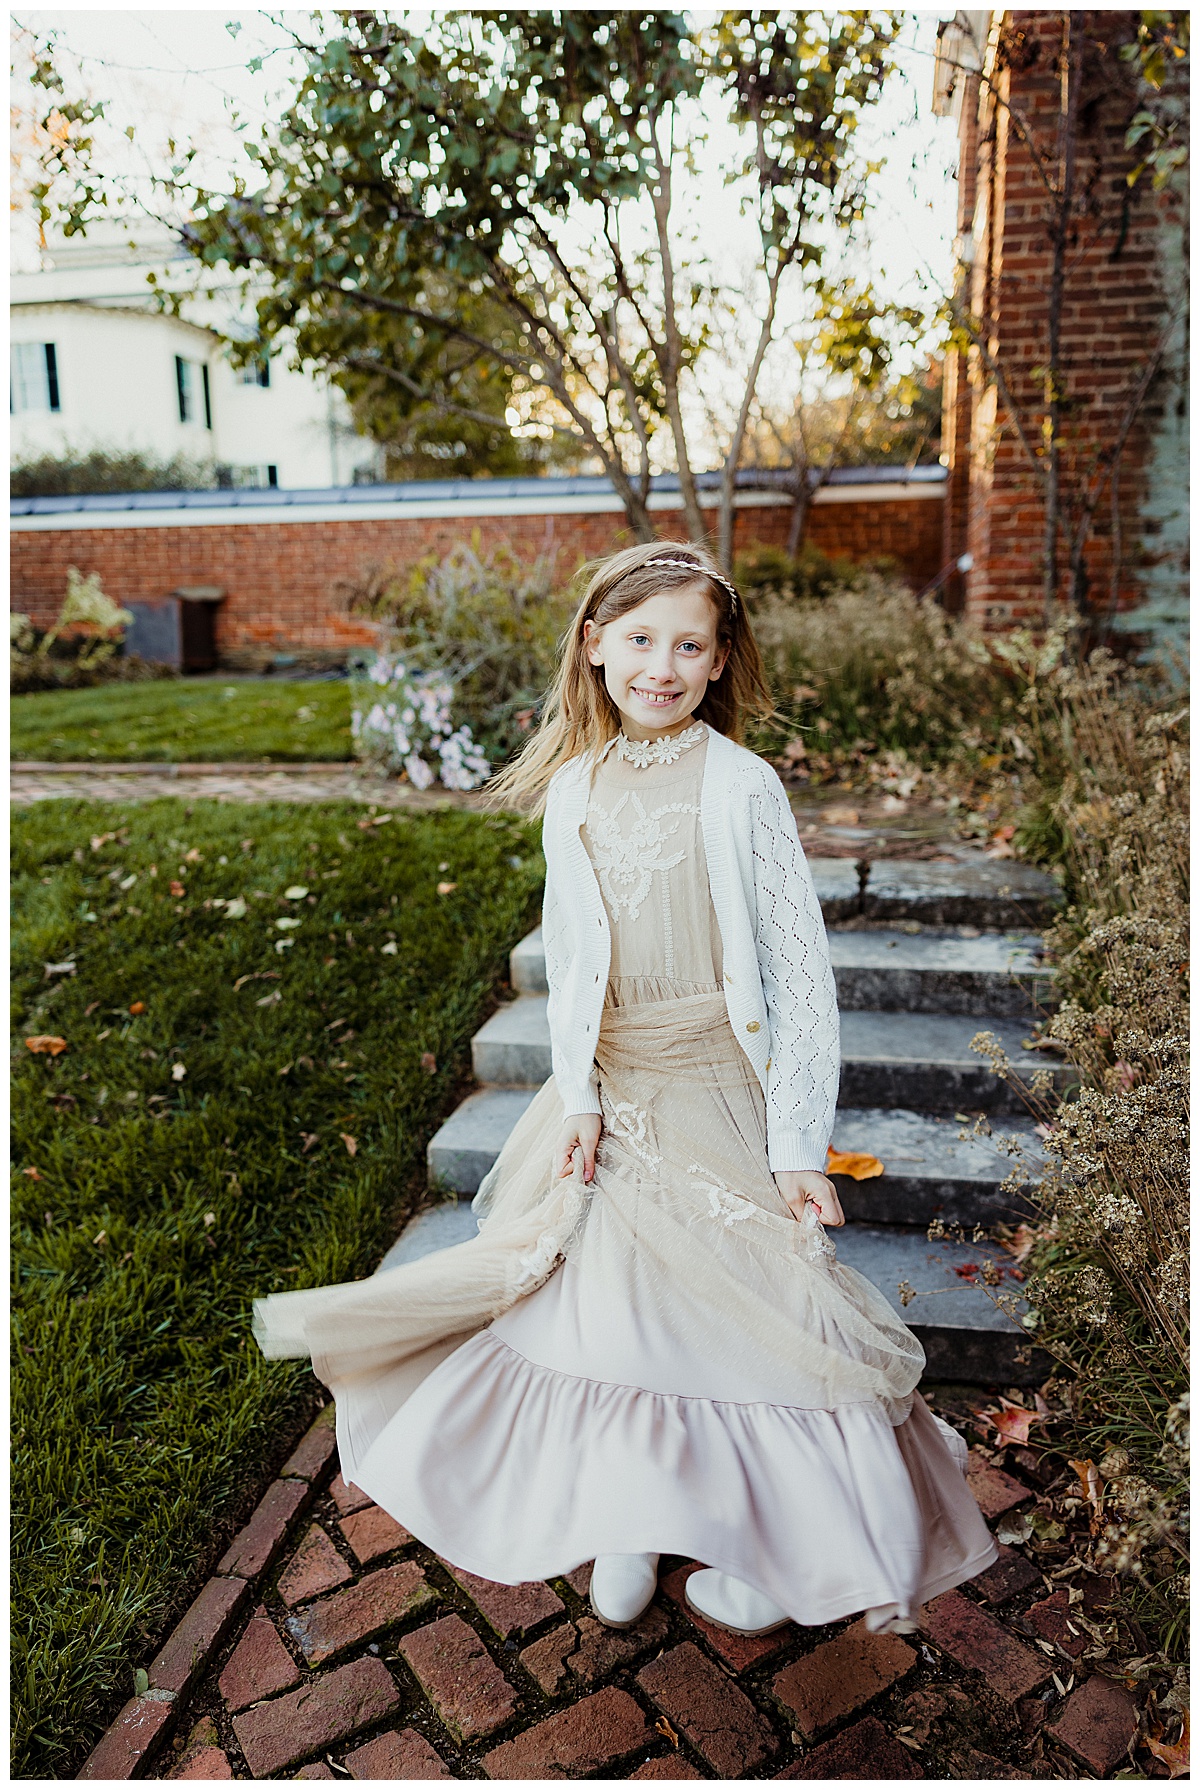 Young girl spins in her dress for Norma Fayak Photography